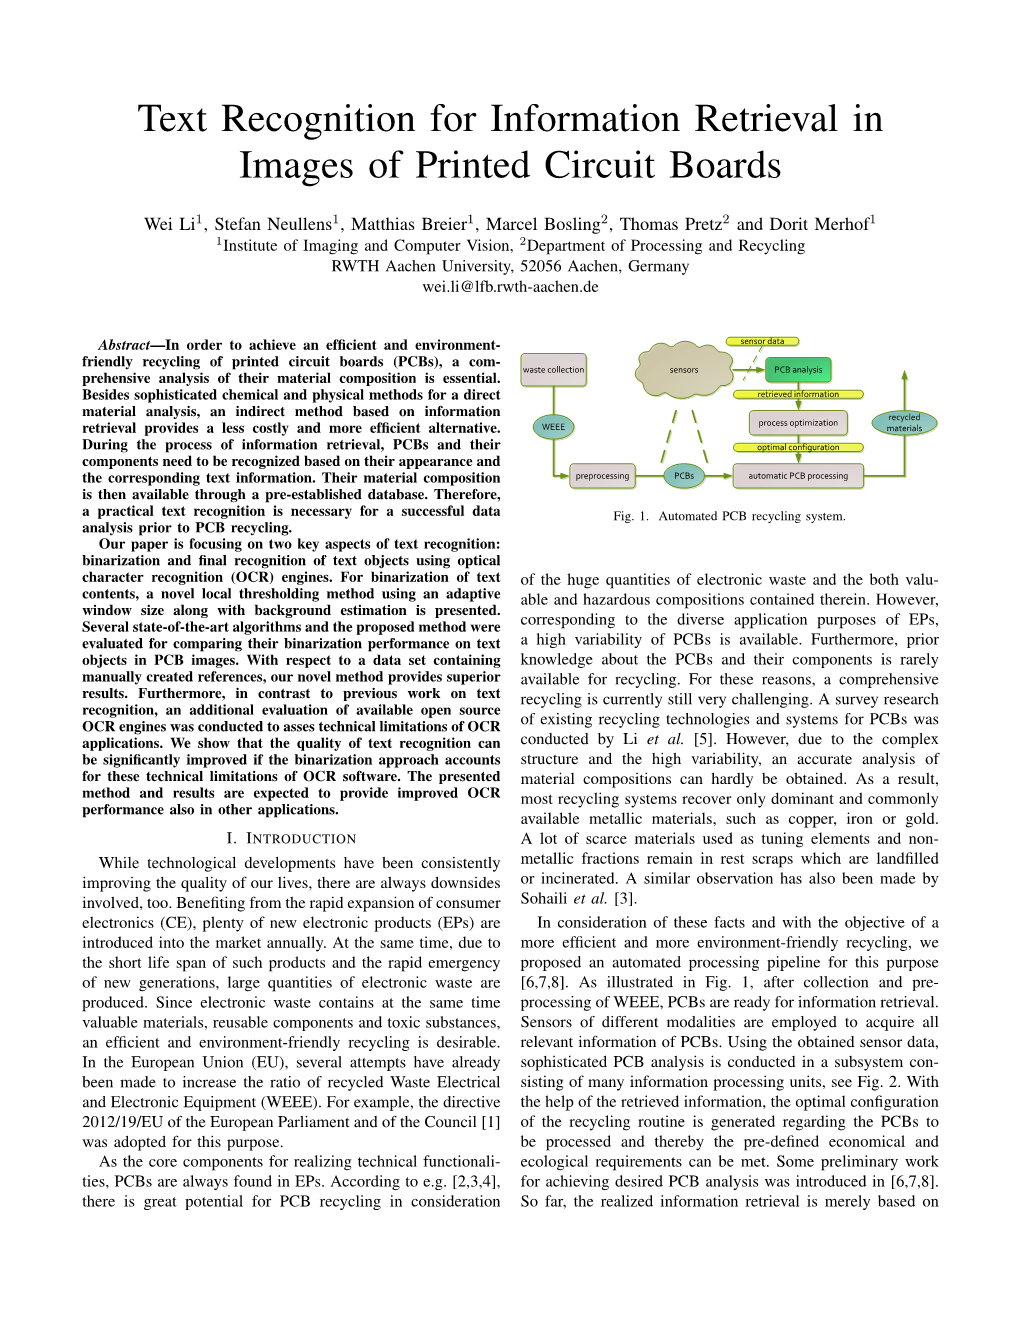 Text Recognition for Information Retrieval in Images of Printed Circuit Boards